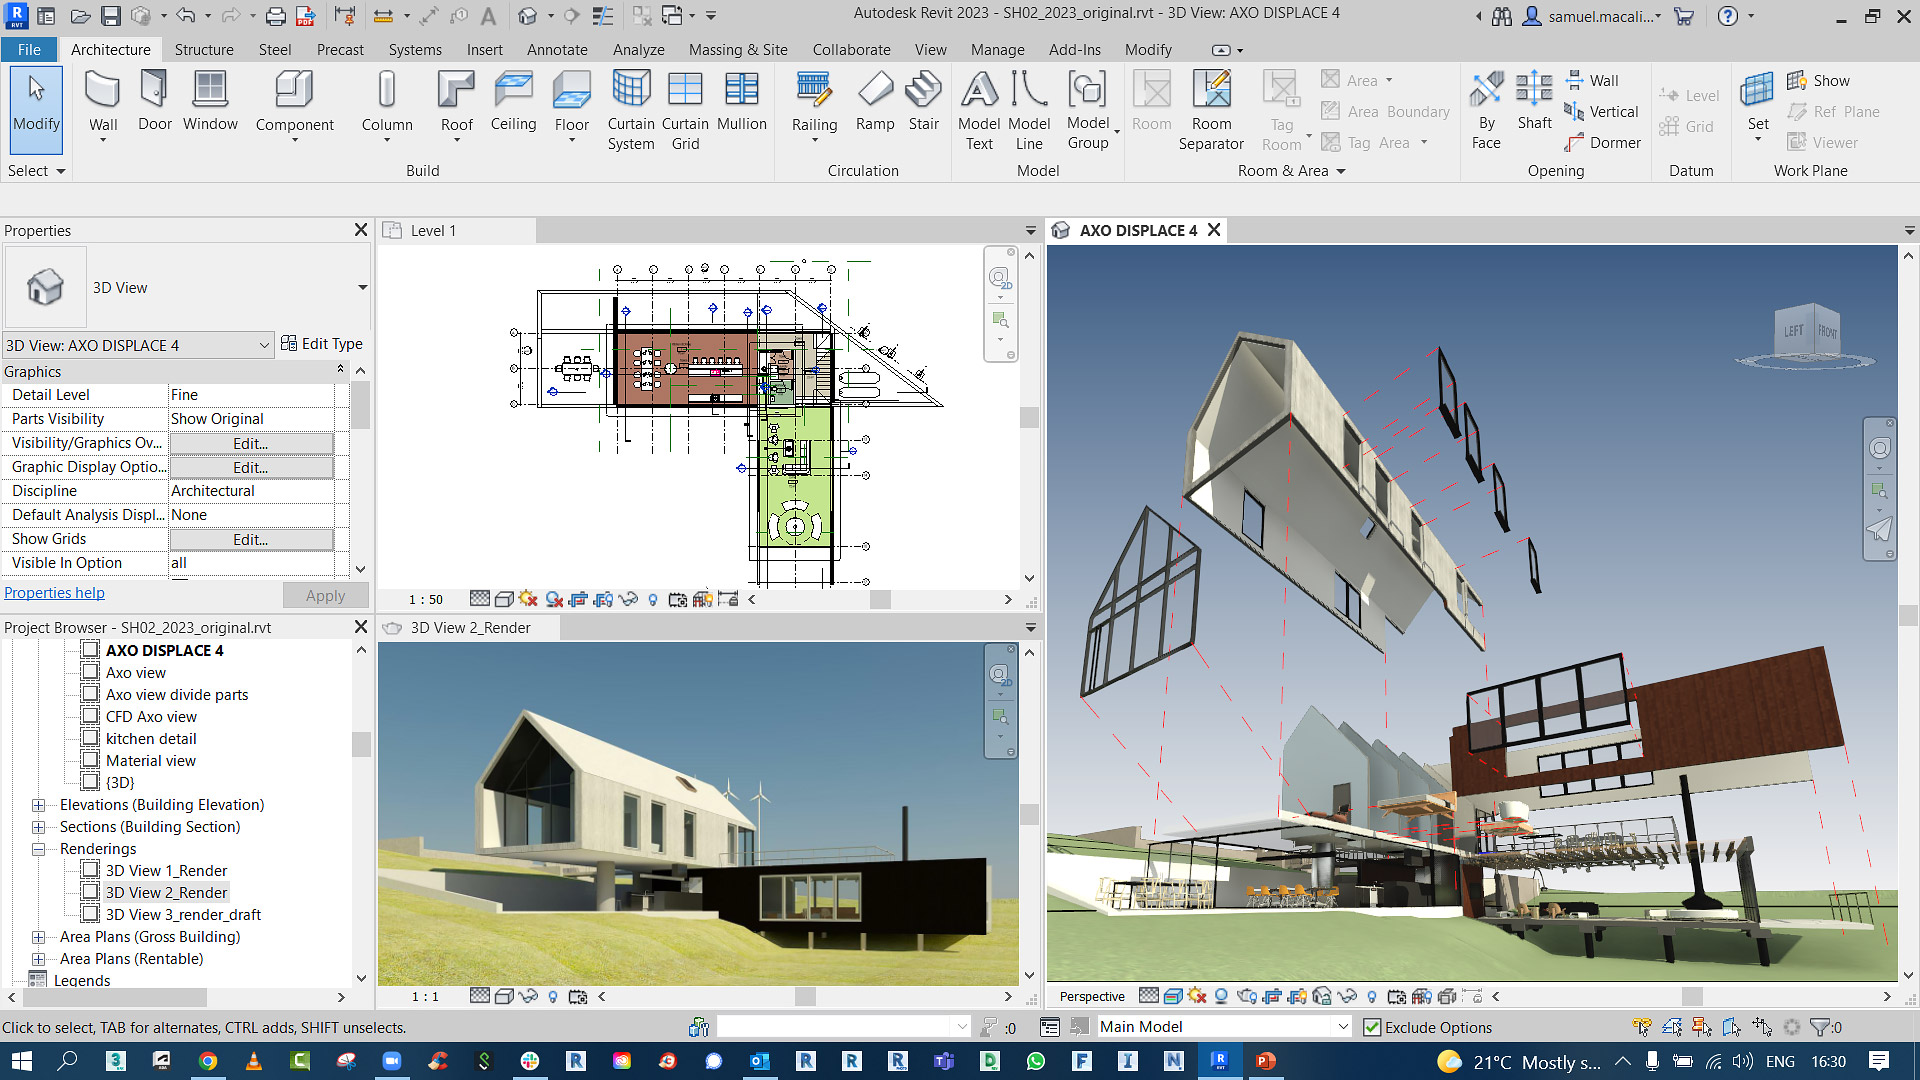 Revit Key Features 2022 | Upcoming Advanced Features 2023 | Autodesk